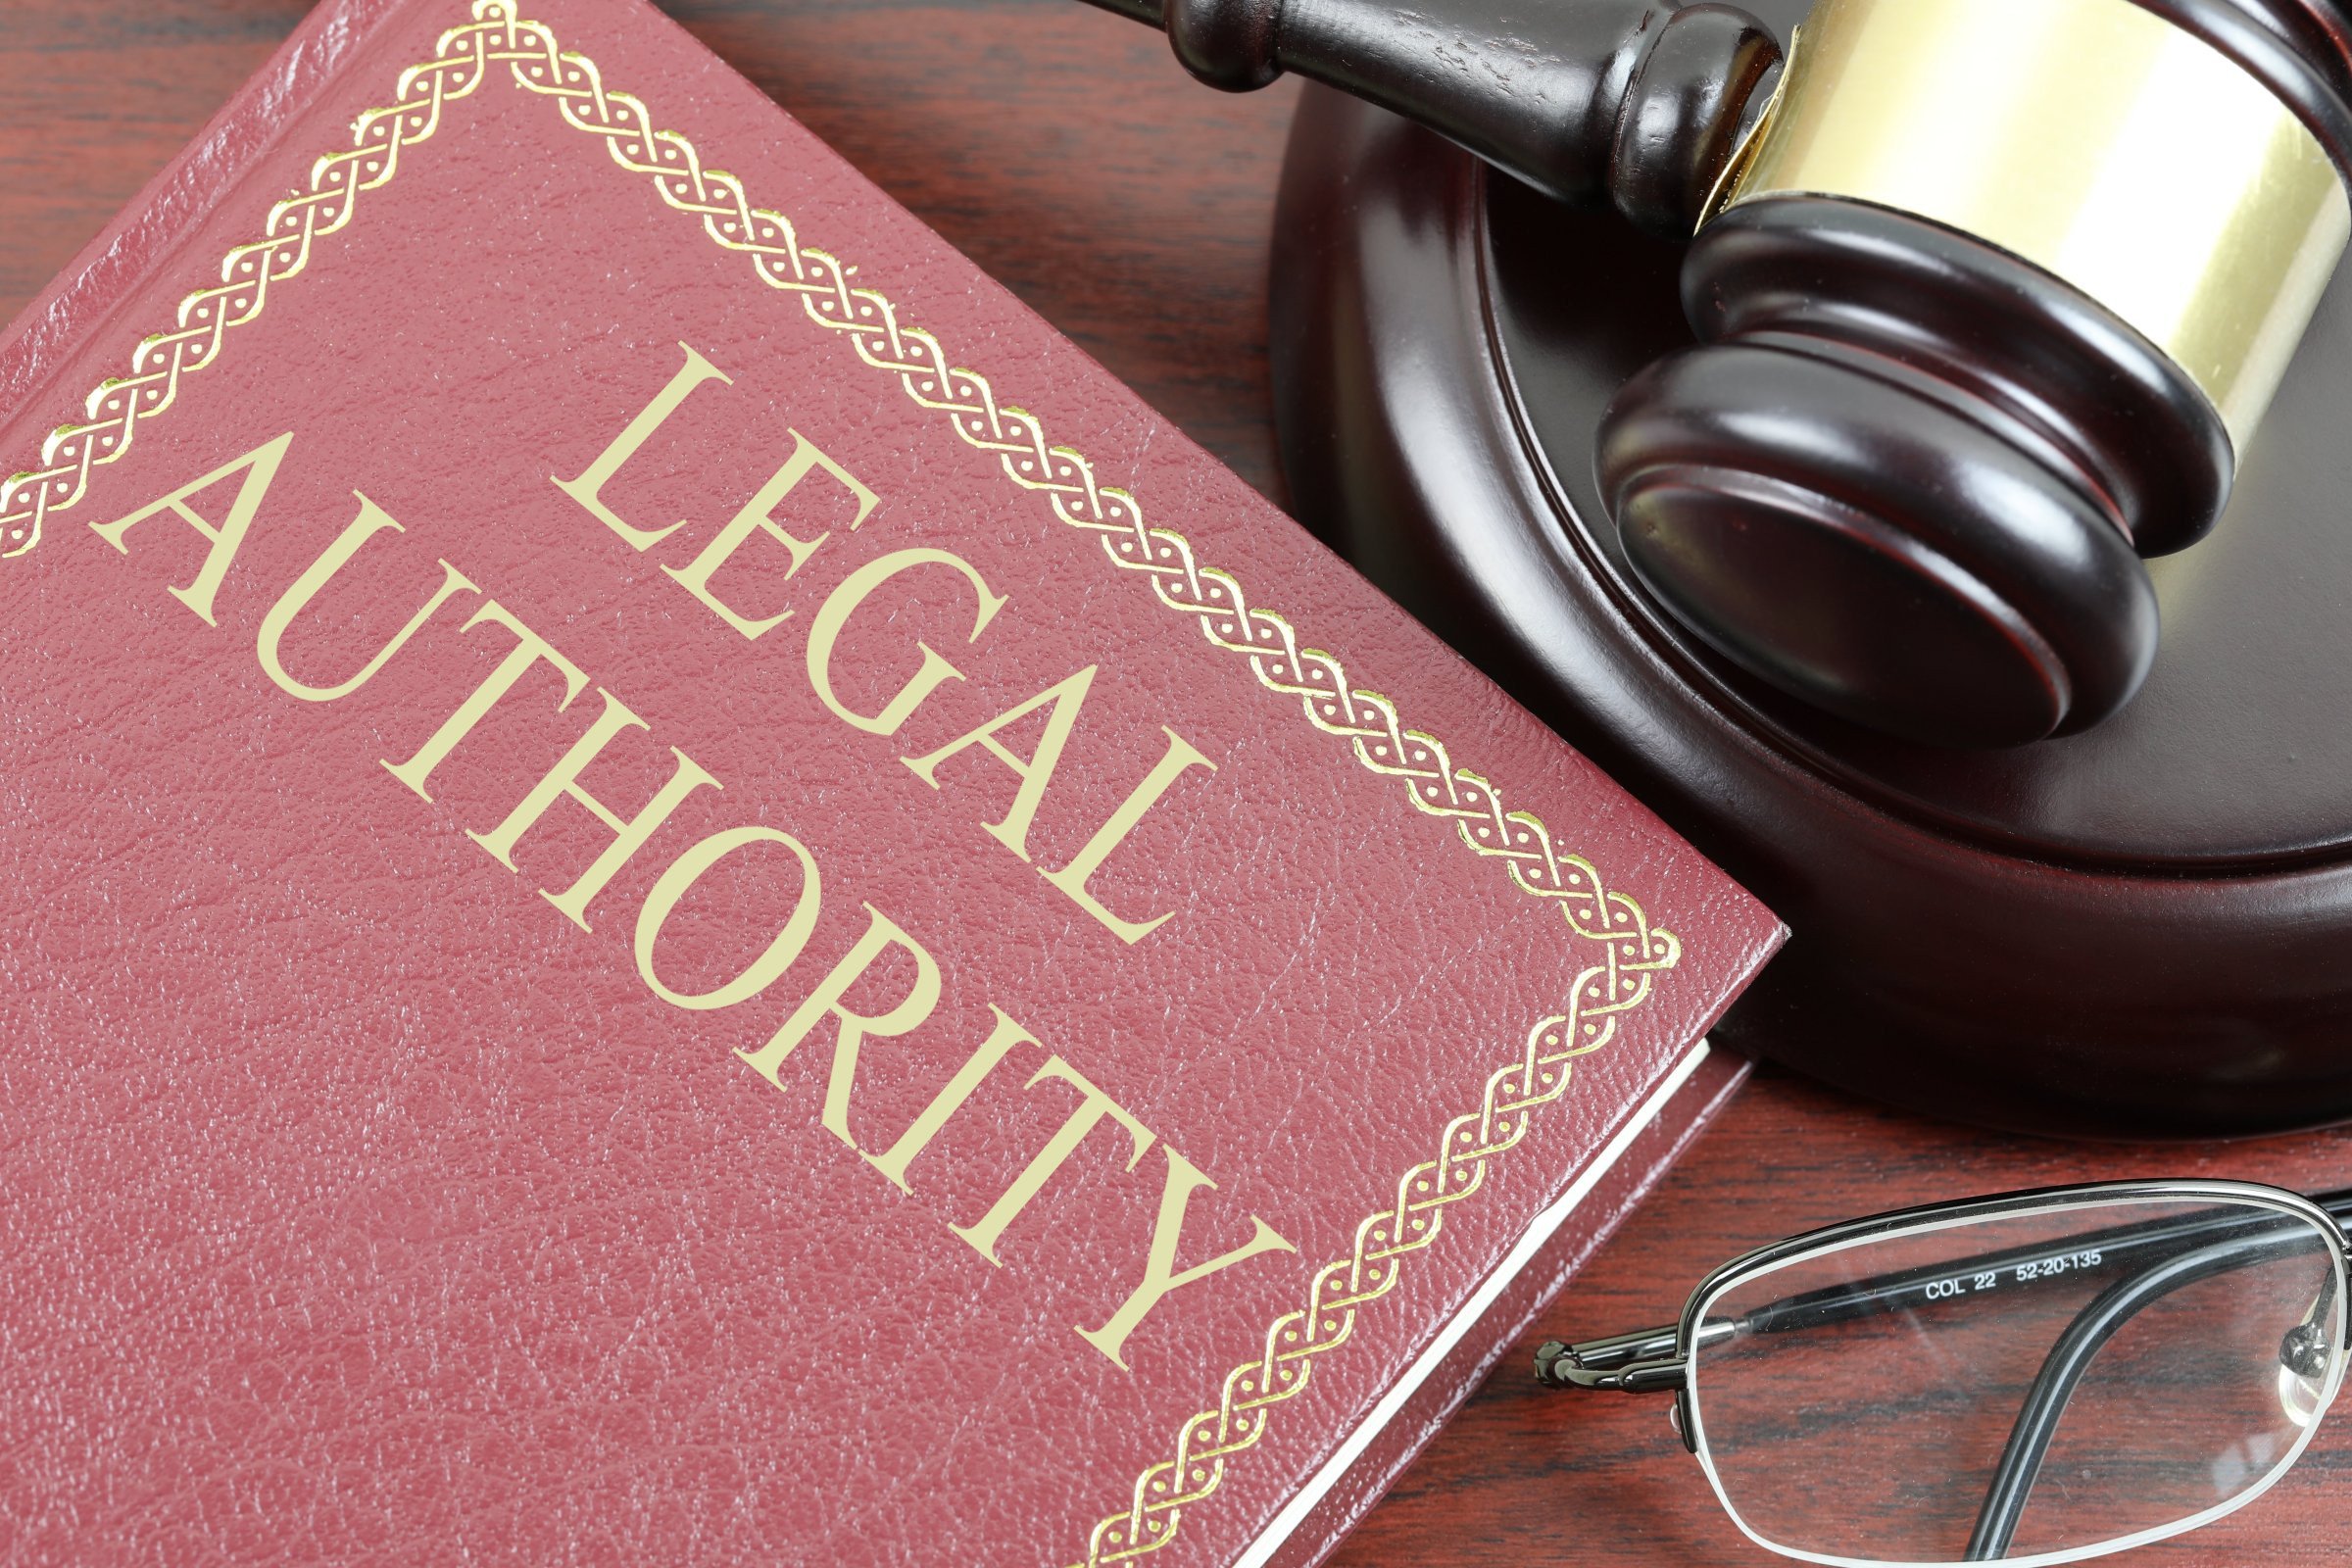 Legal Authority - Free of Charge Creative Commons Law book image